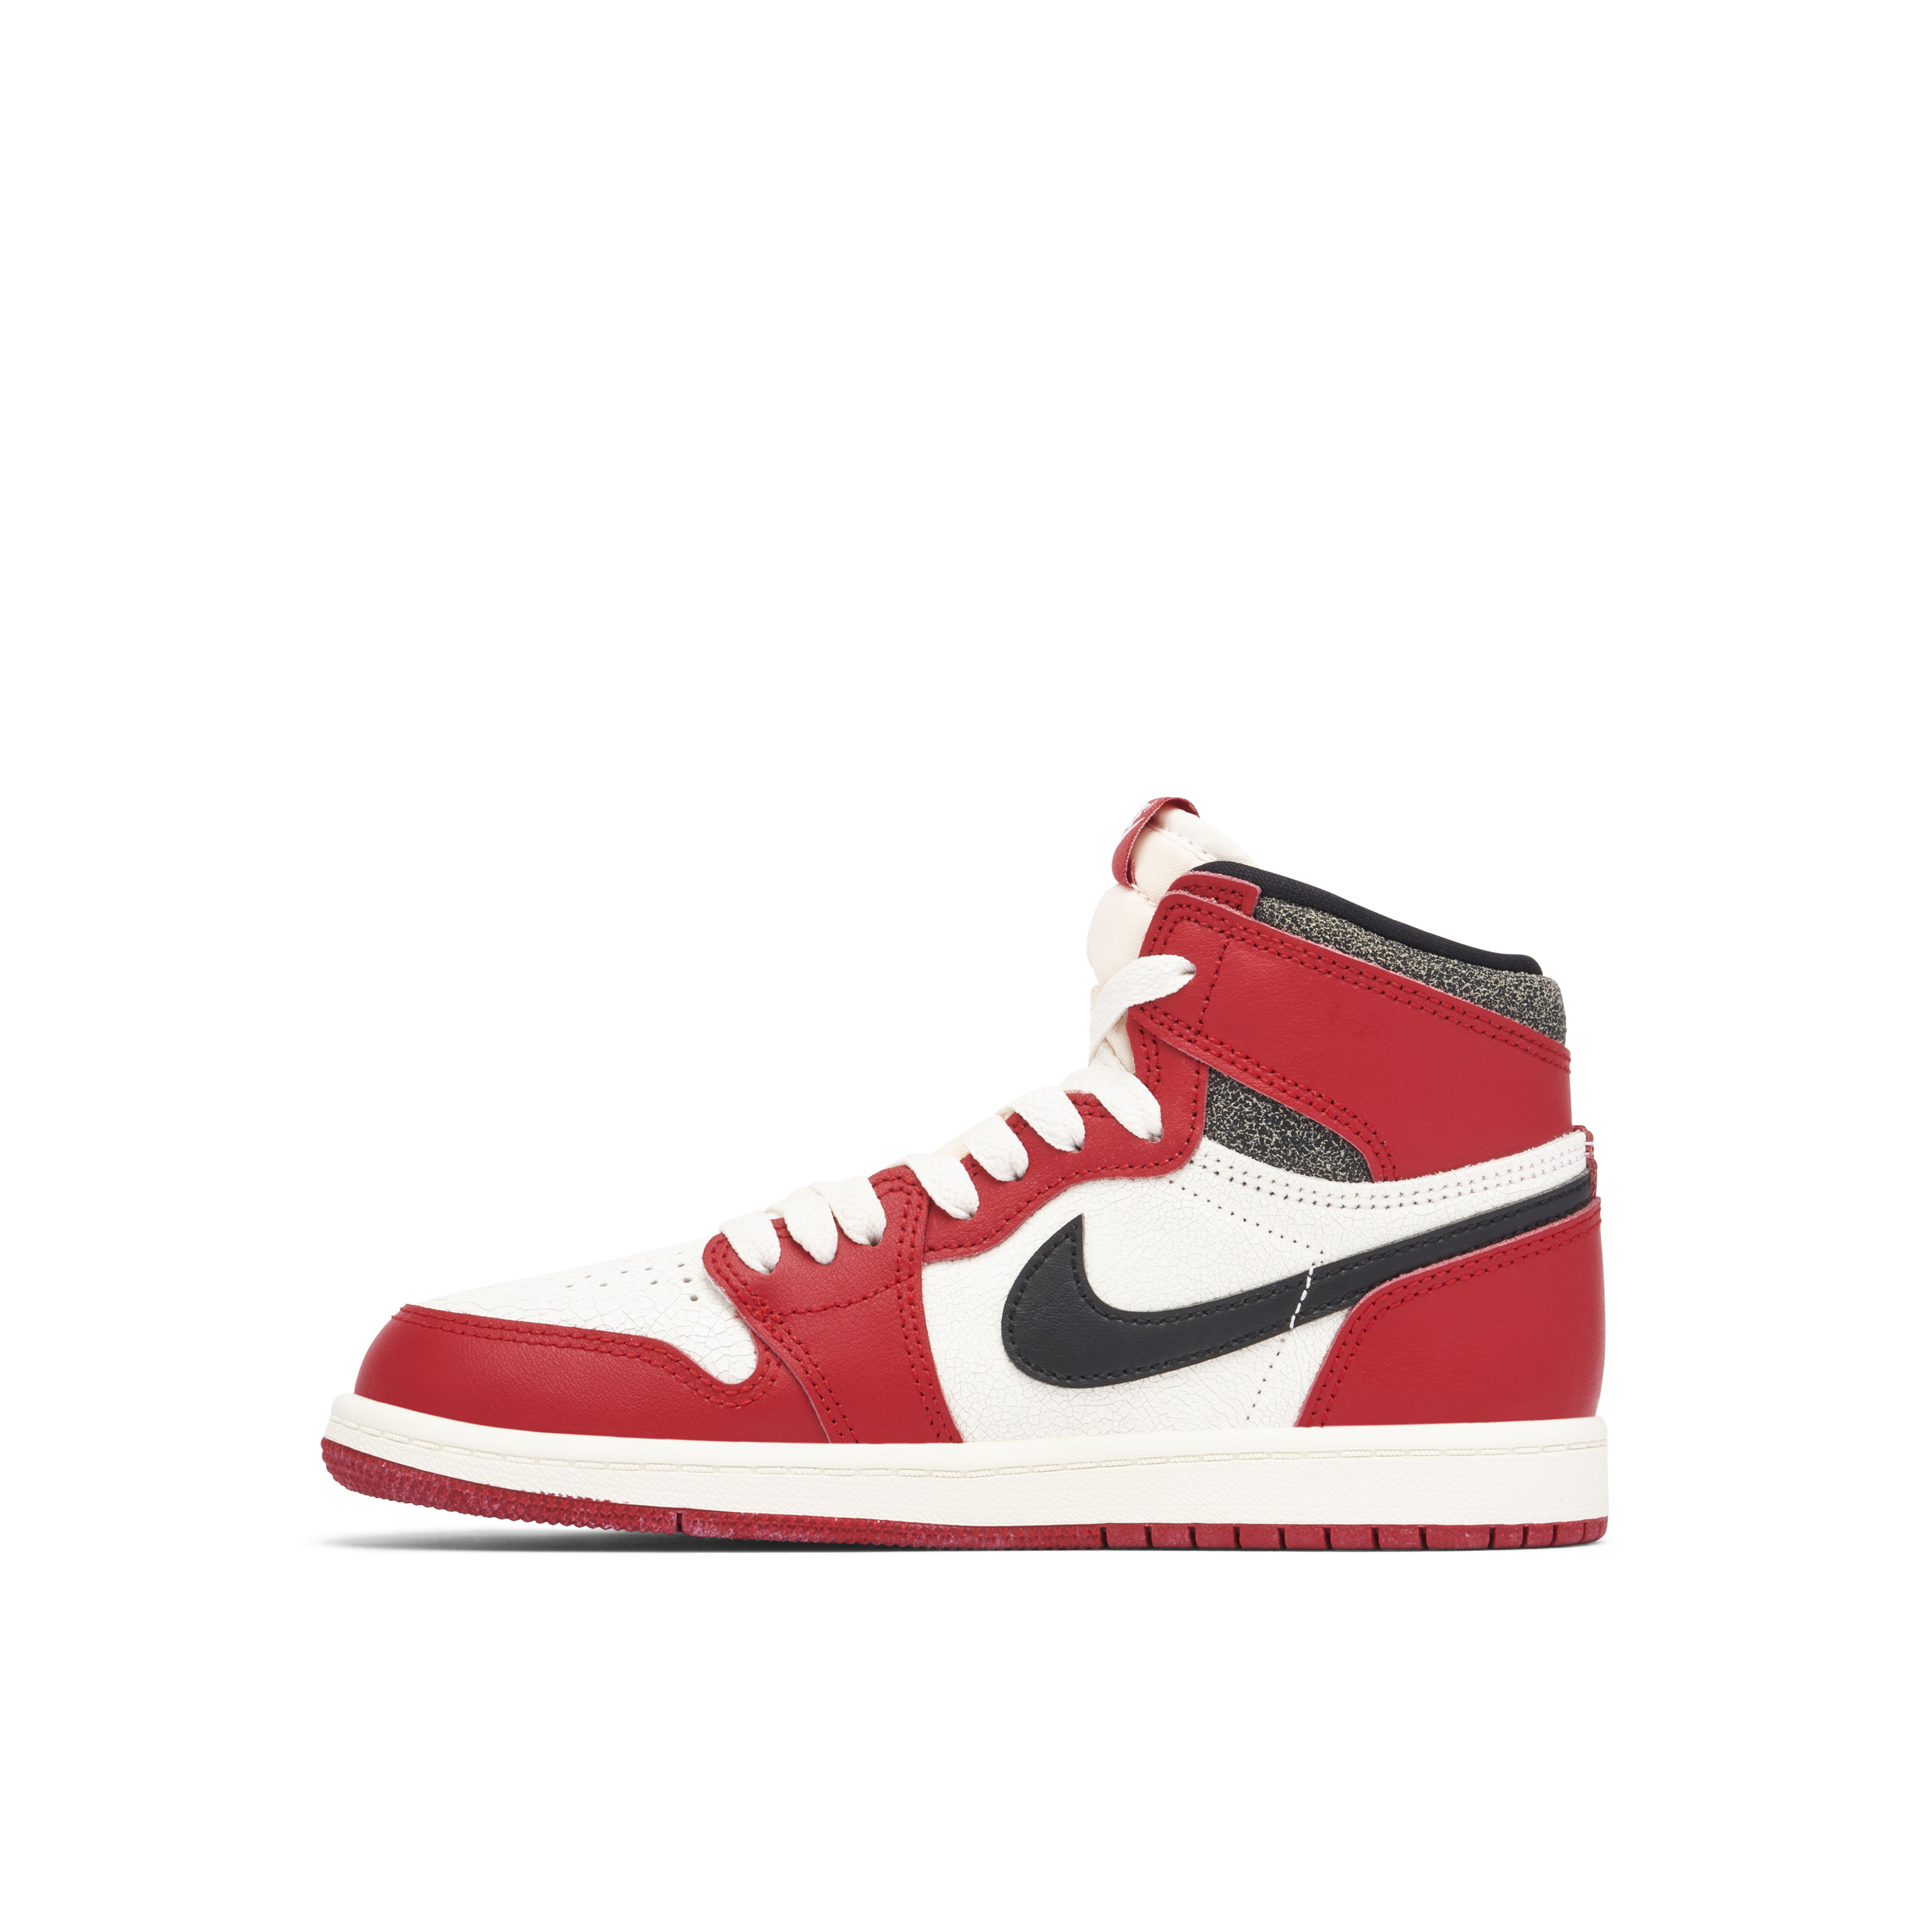 Air Jordan 1 High OG Chicago Lost and Found PS | FD1412-612 | Laced